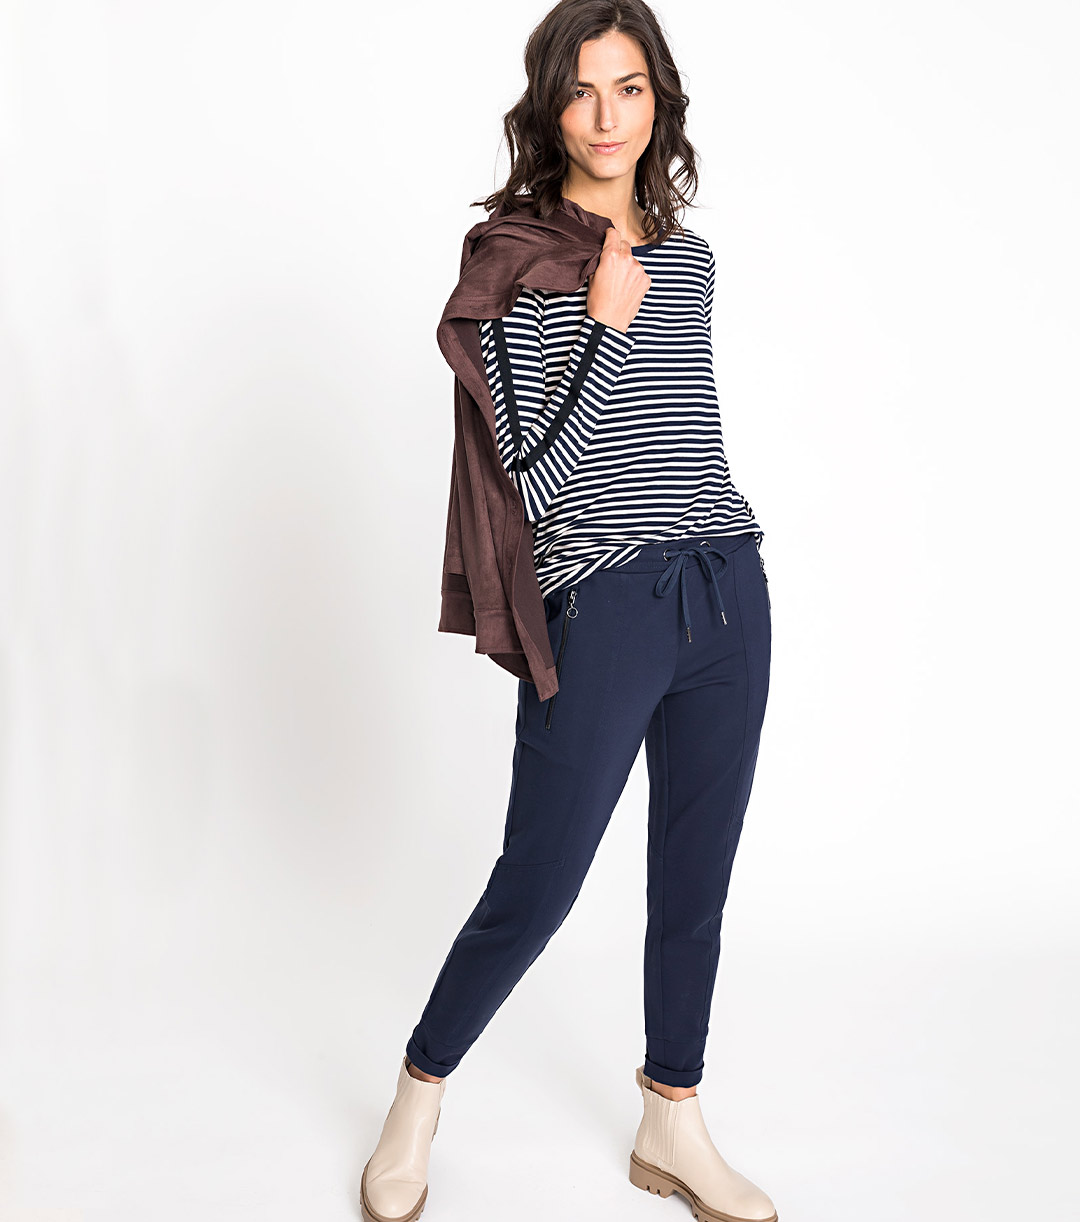 We're loving loungewear looks that can be worn both at home and on the go!